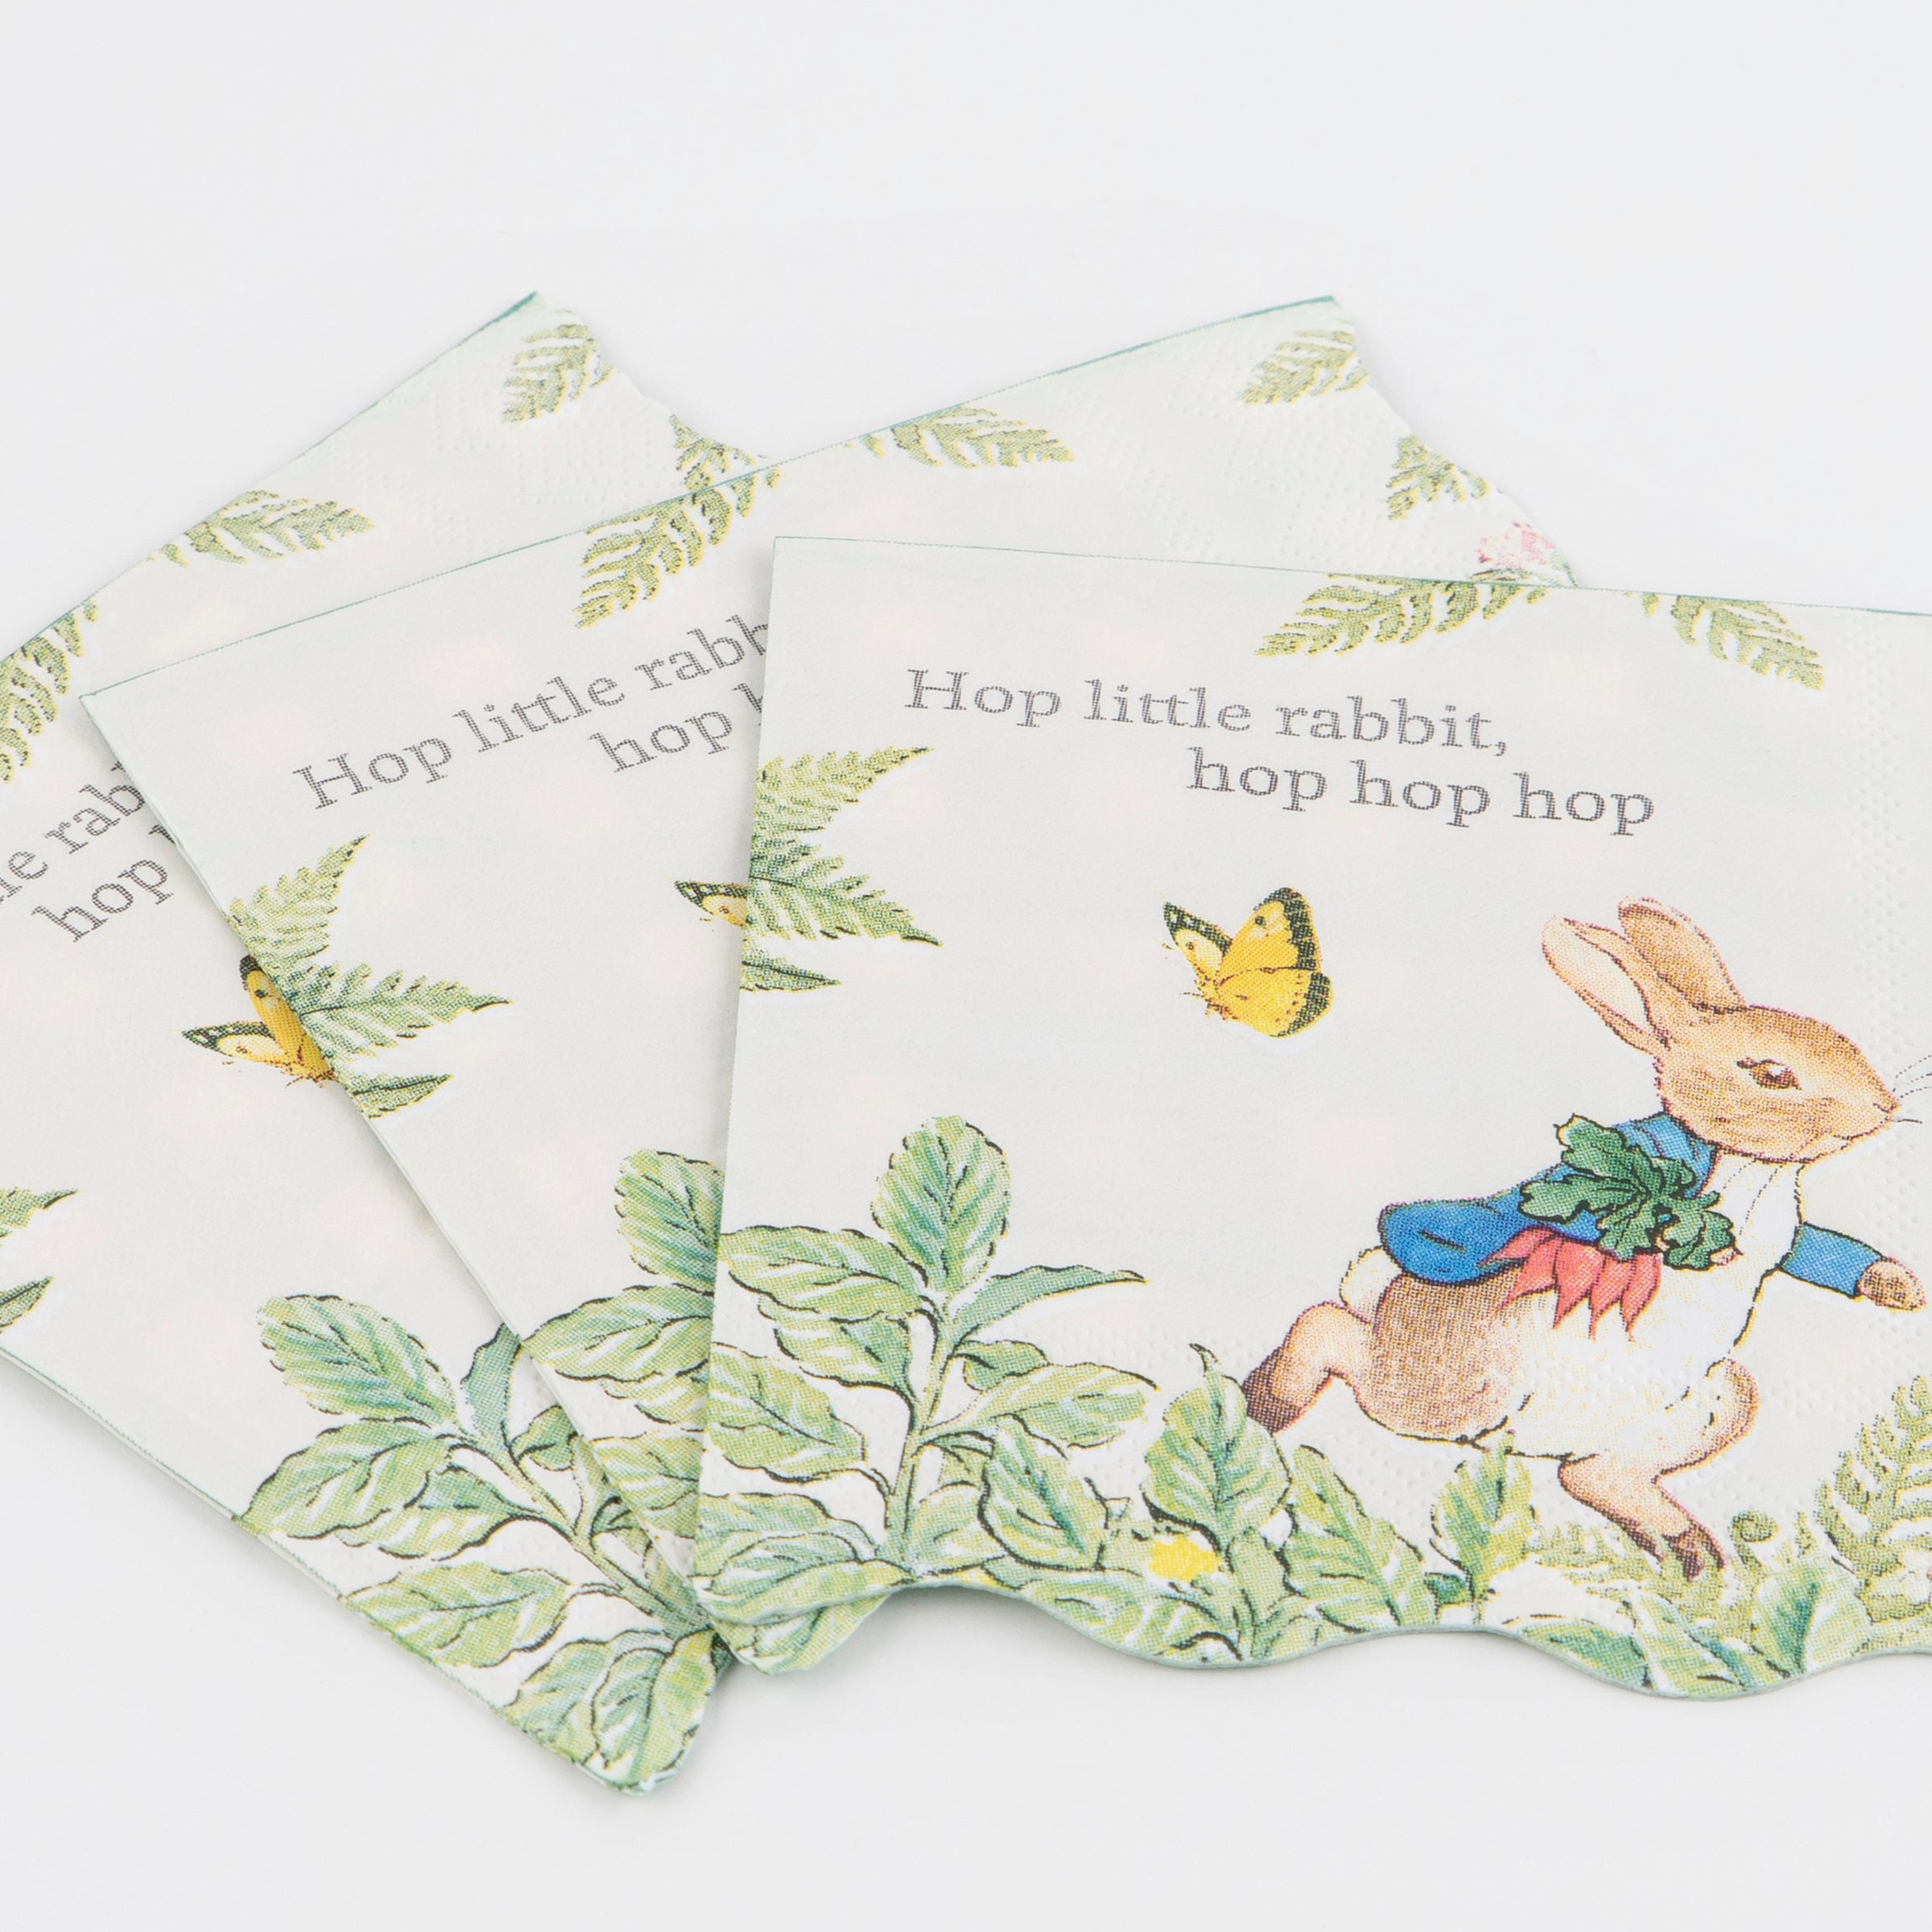 These napkins are perfect as Easter napkins or for a Peter Rabbit party.